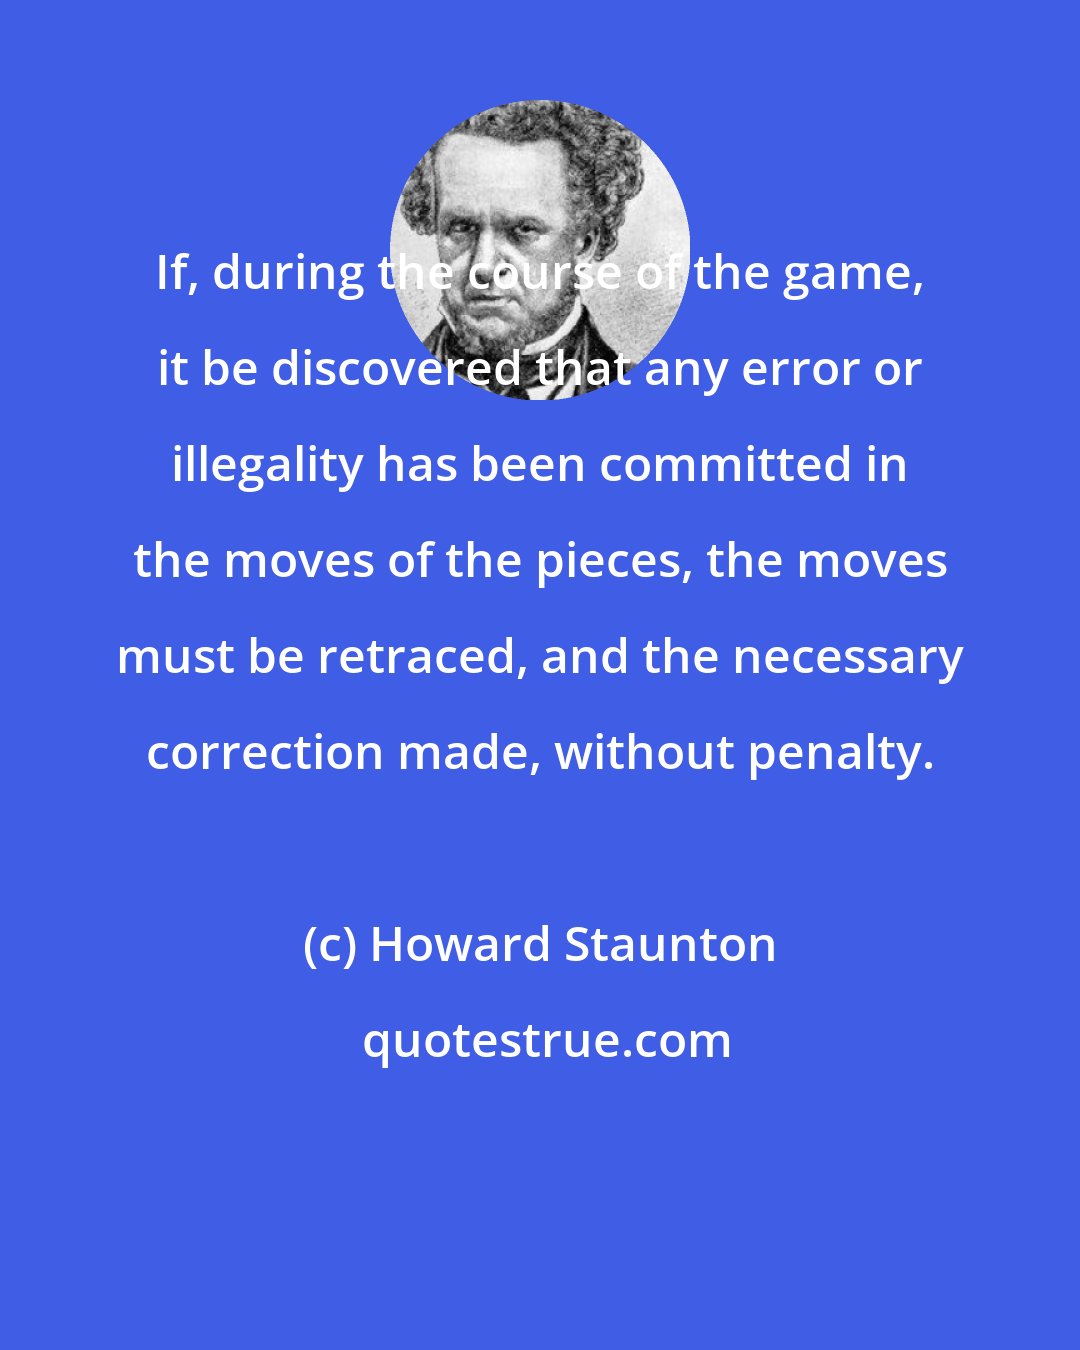 Howard Staunton: If, during the course of the game, it be discovered that any error or illegality has been committed in the moves of the pieces, the moves must be retraced, and the necessary correction made, without penalty.